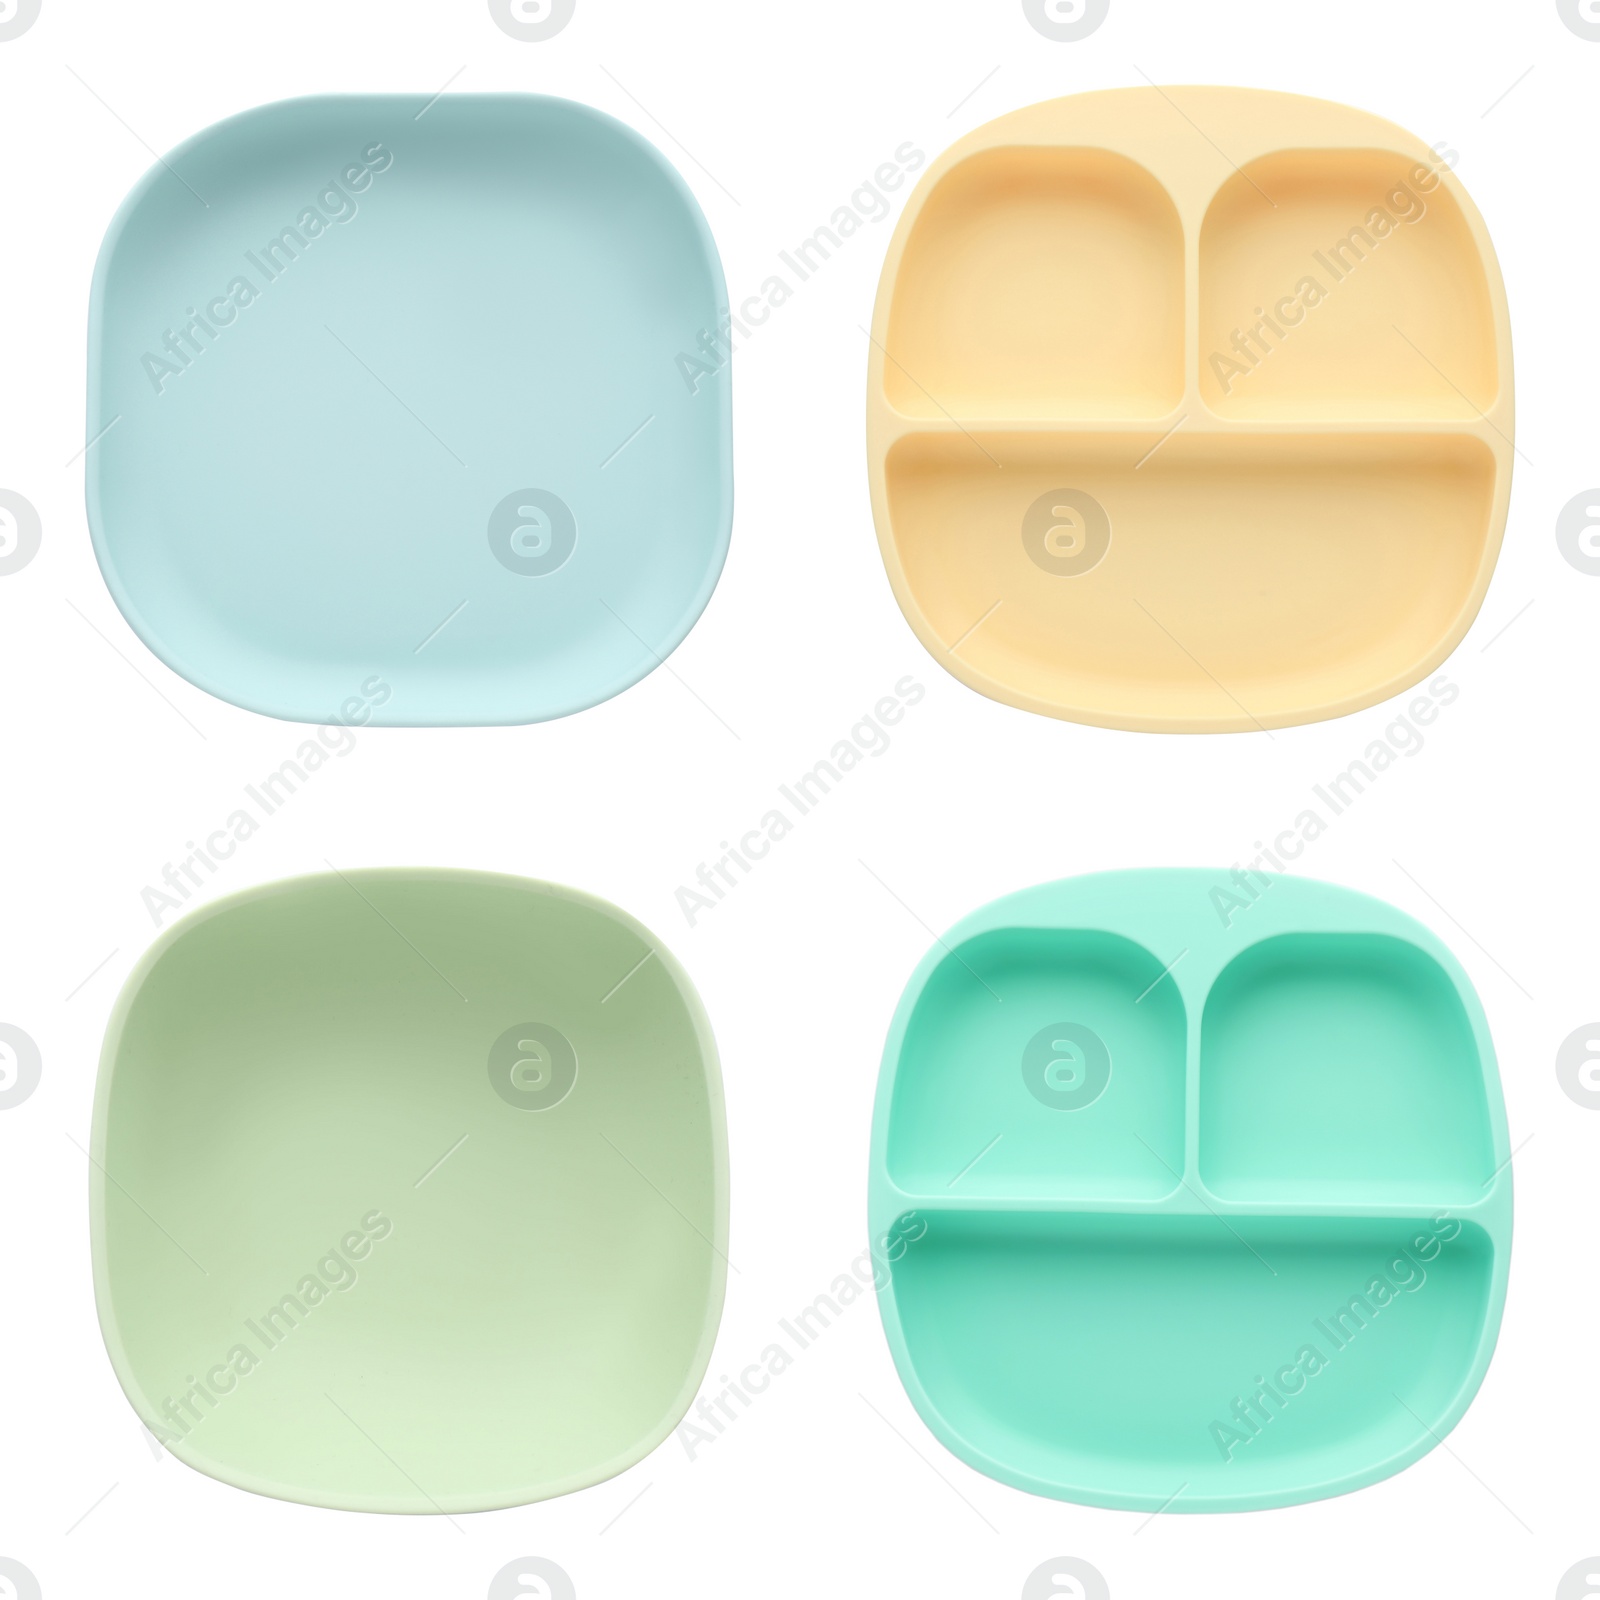 Image of Set with colorful plates on white background, top view. Serving baby food